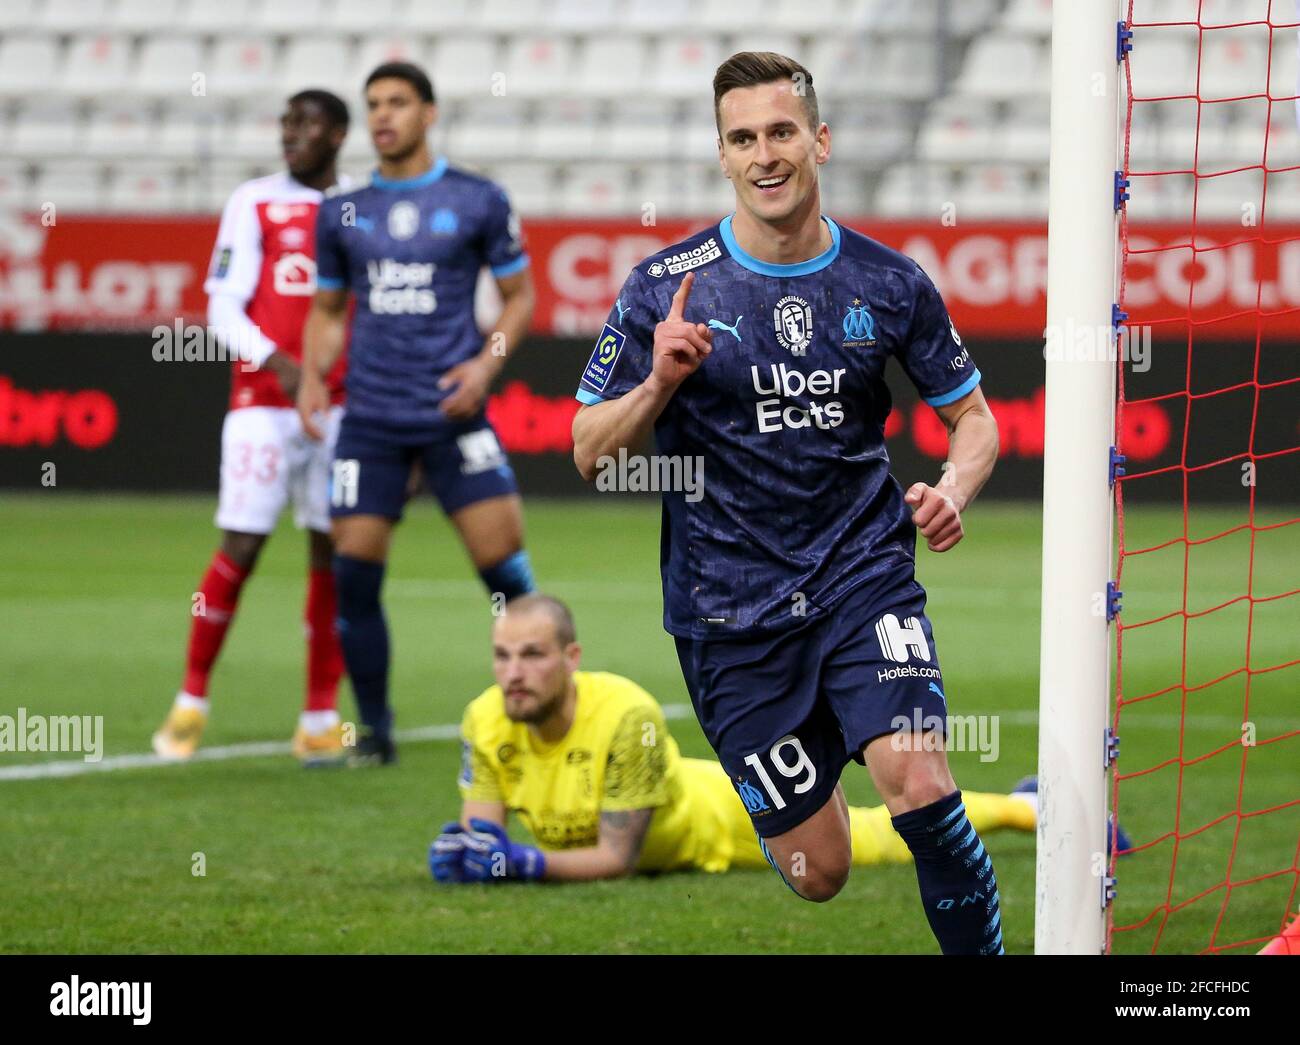 Arkadiusz Milik of Marseille celebrates his goal (ultimately cancelled) while goalkeeper of Reims Predrag Rajkovic lies down during the French championship Ligue 1 football match between Stade de Reims and Olympique de Marseille (OM) on April 23, 2021 at Stade Auguste Delaune in Reims, France - Photo Jean Catuffe / DPPI Stock Photo